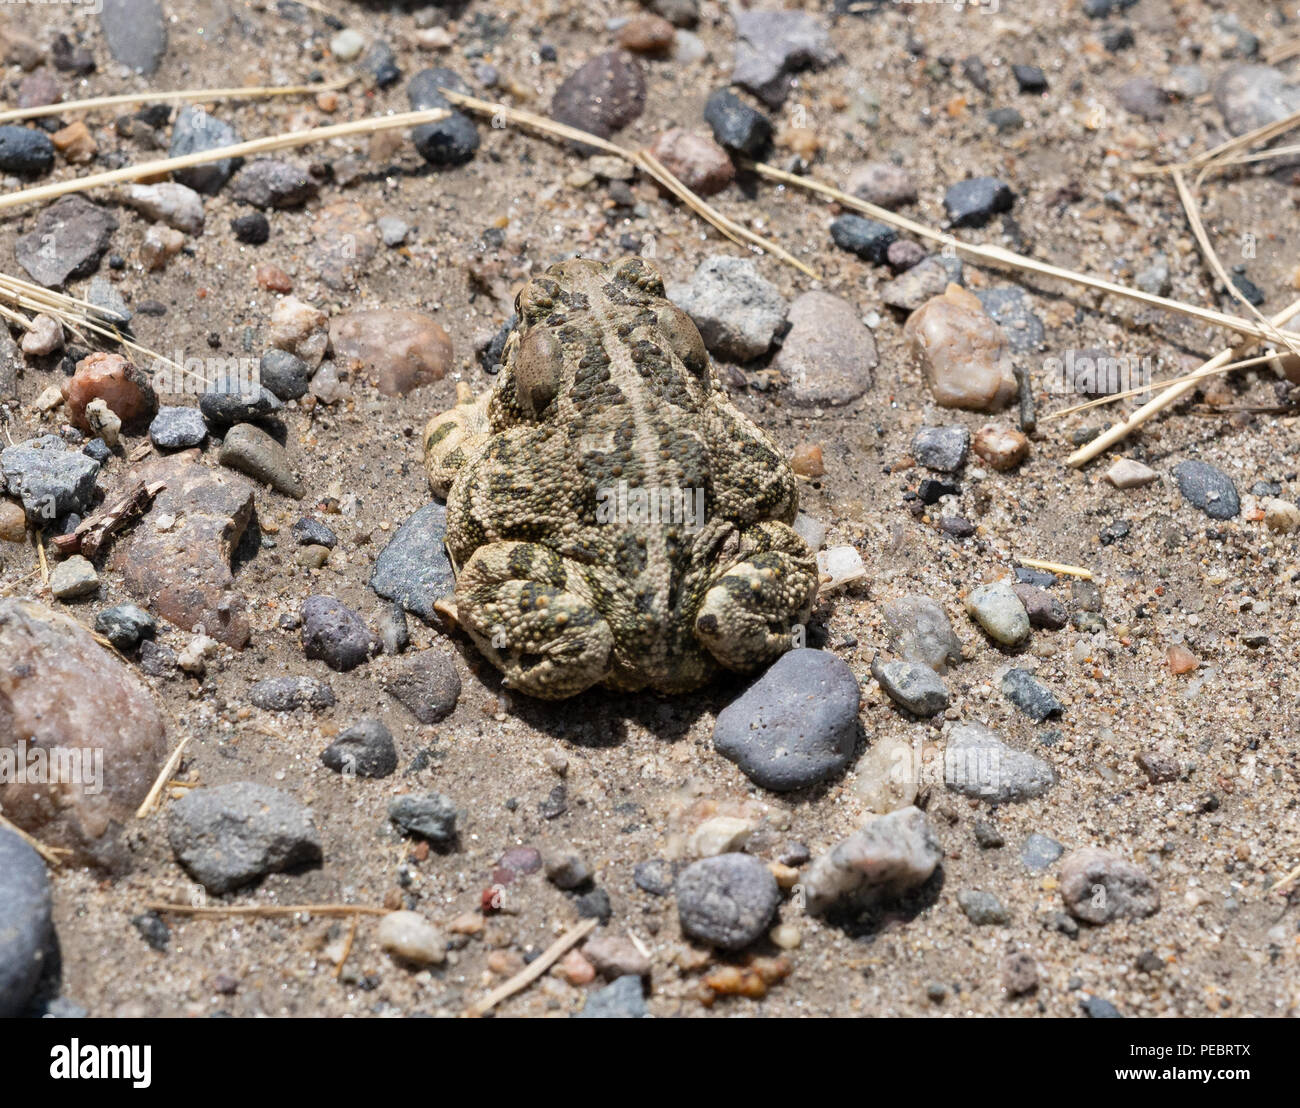 Close up of a Woodhouse Toad, Anaxyrus woodhousii, with tan and olive green stripes and multiple warts. Its back is to the camera and it is sitting am Stock Photo